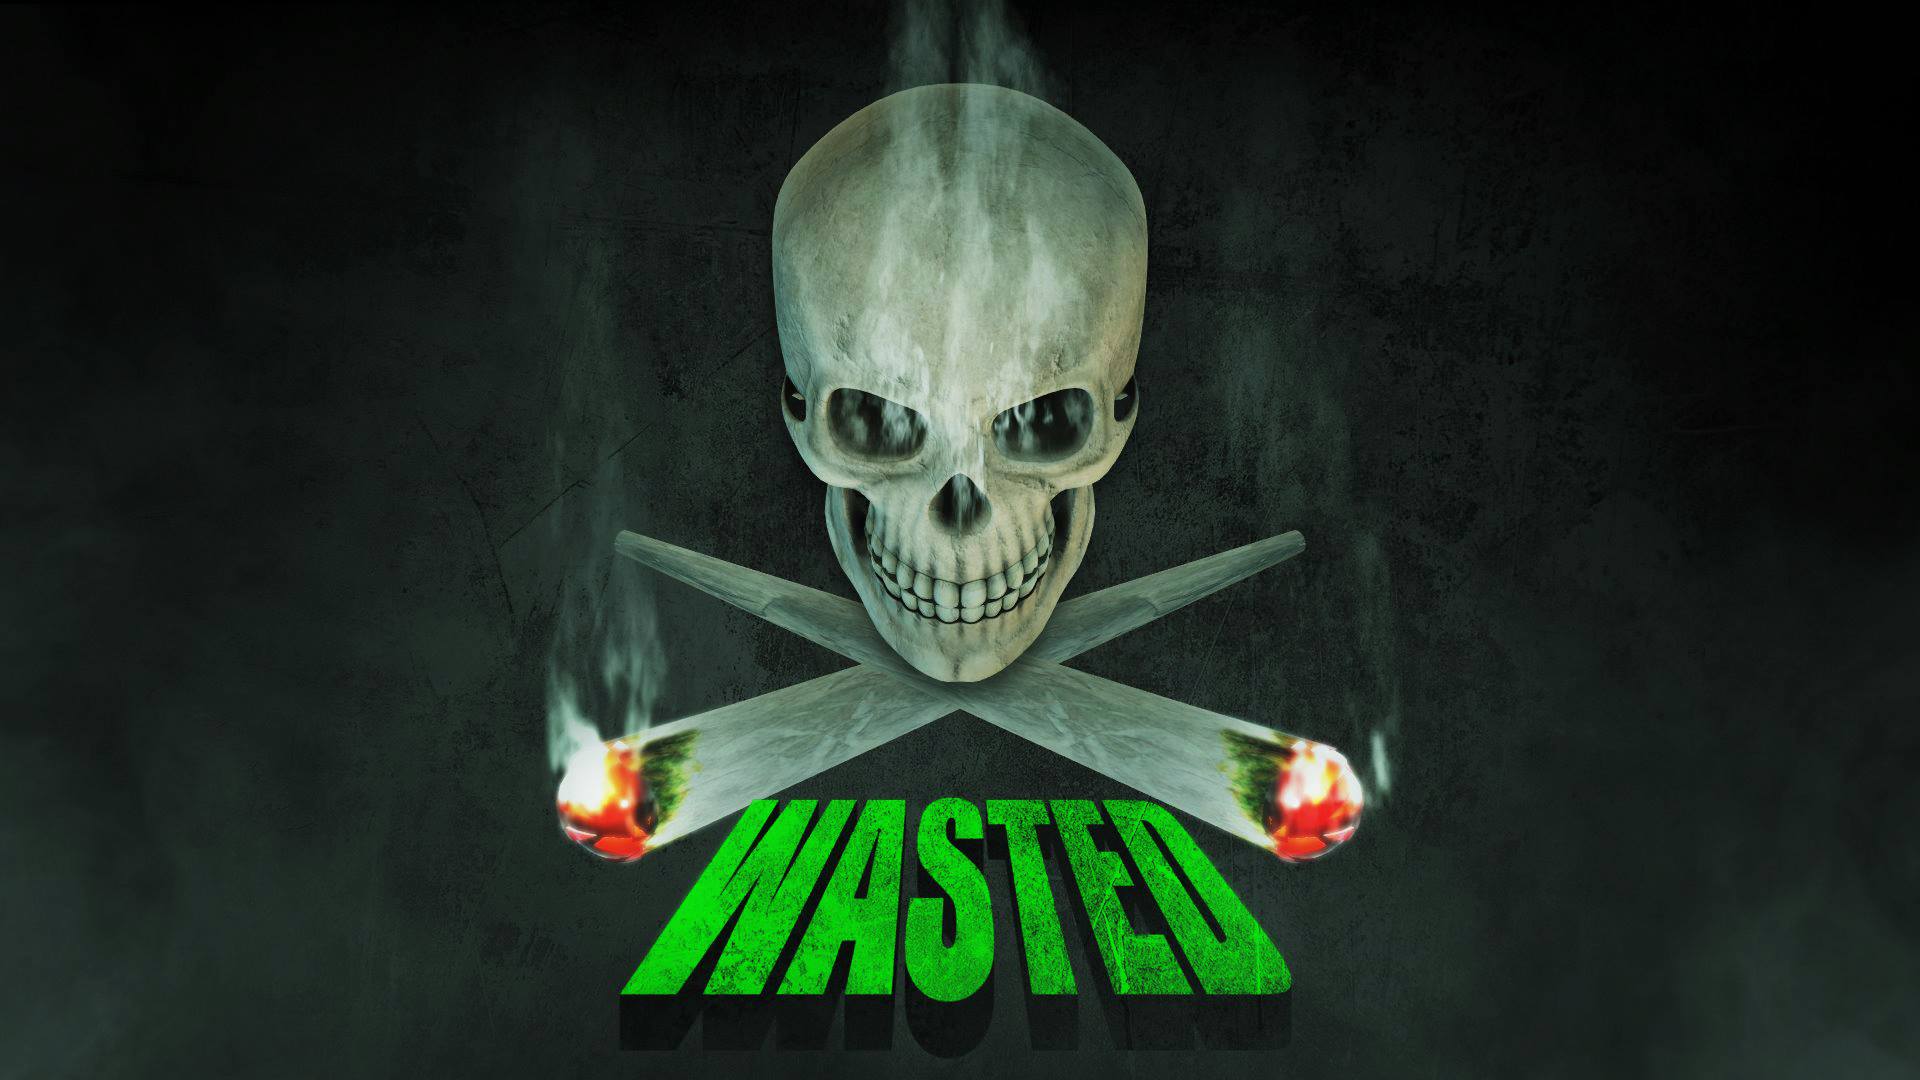 Creating ‘Wasted: A Stoner Zombie Comedy’ with Steve Kasan